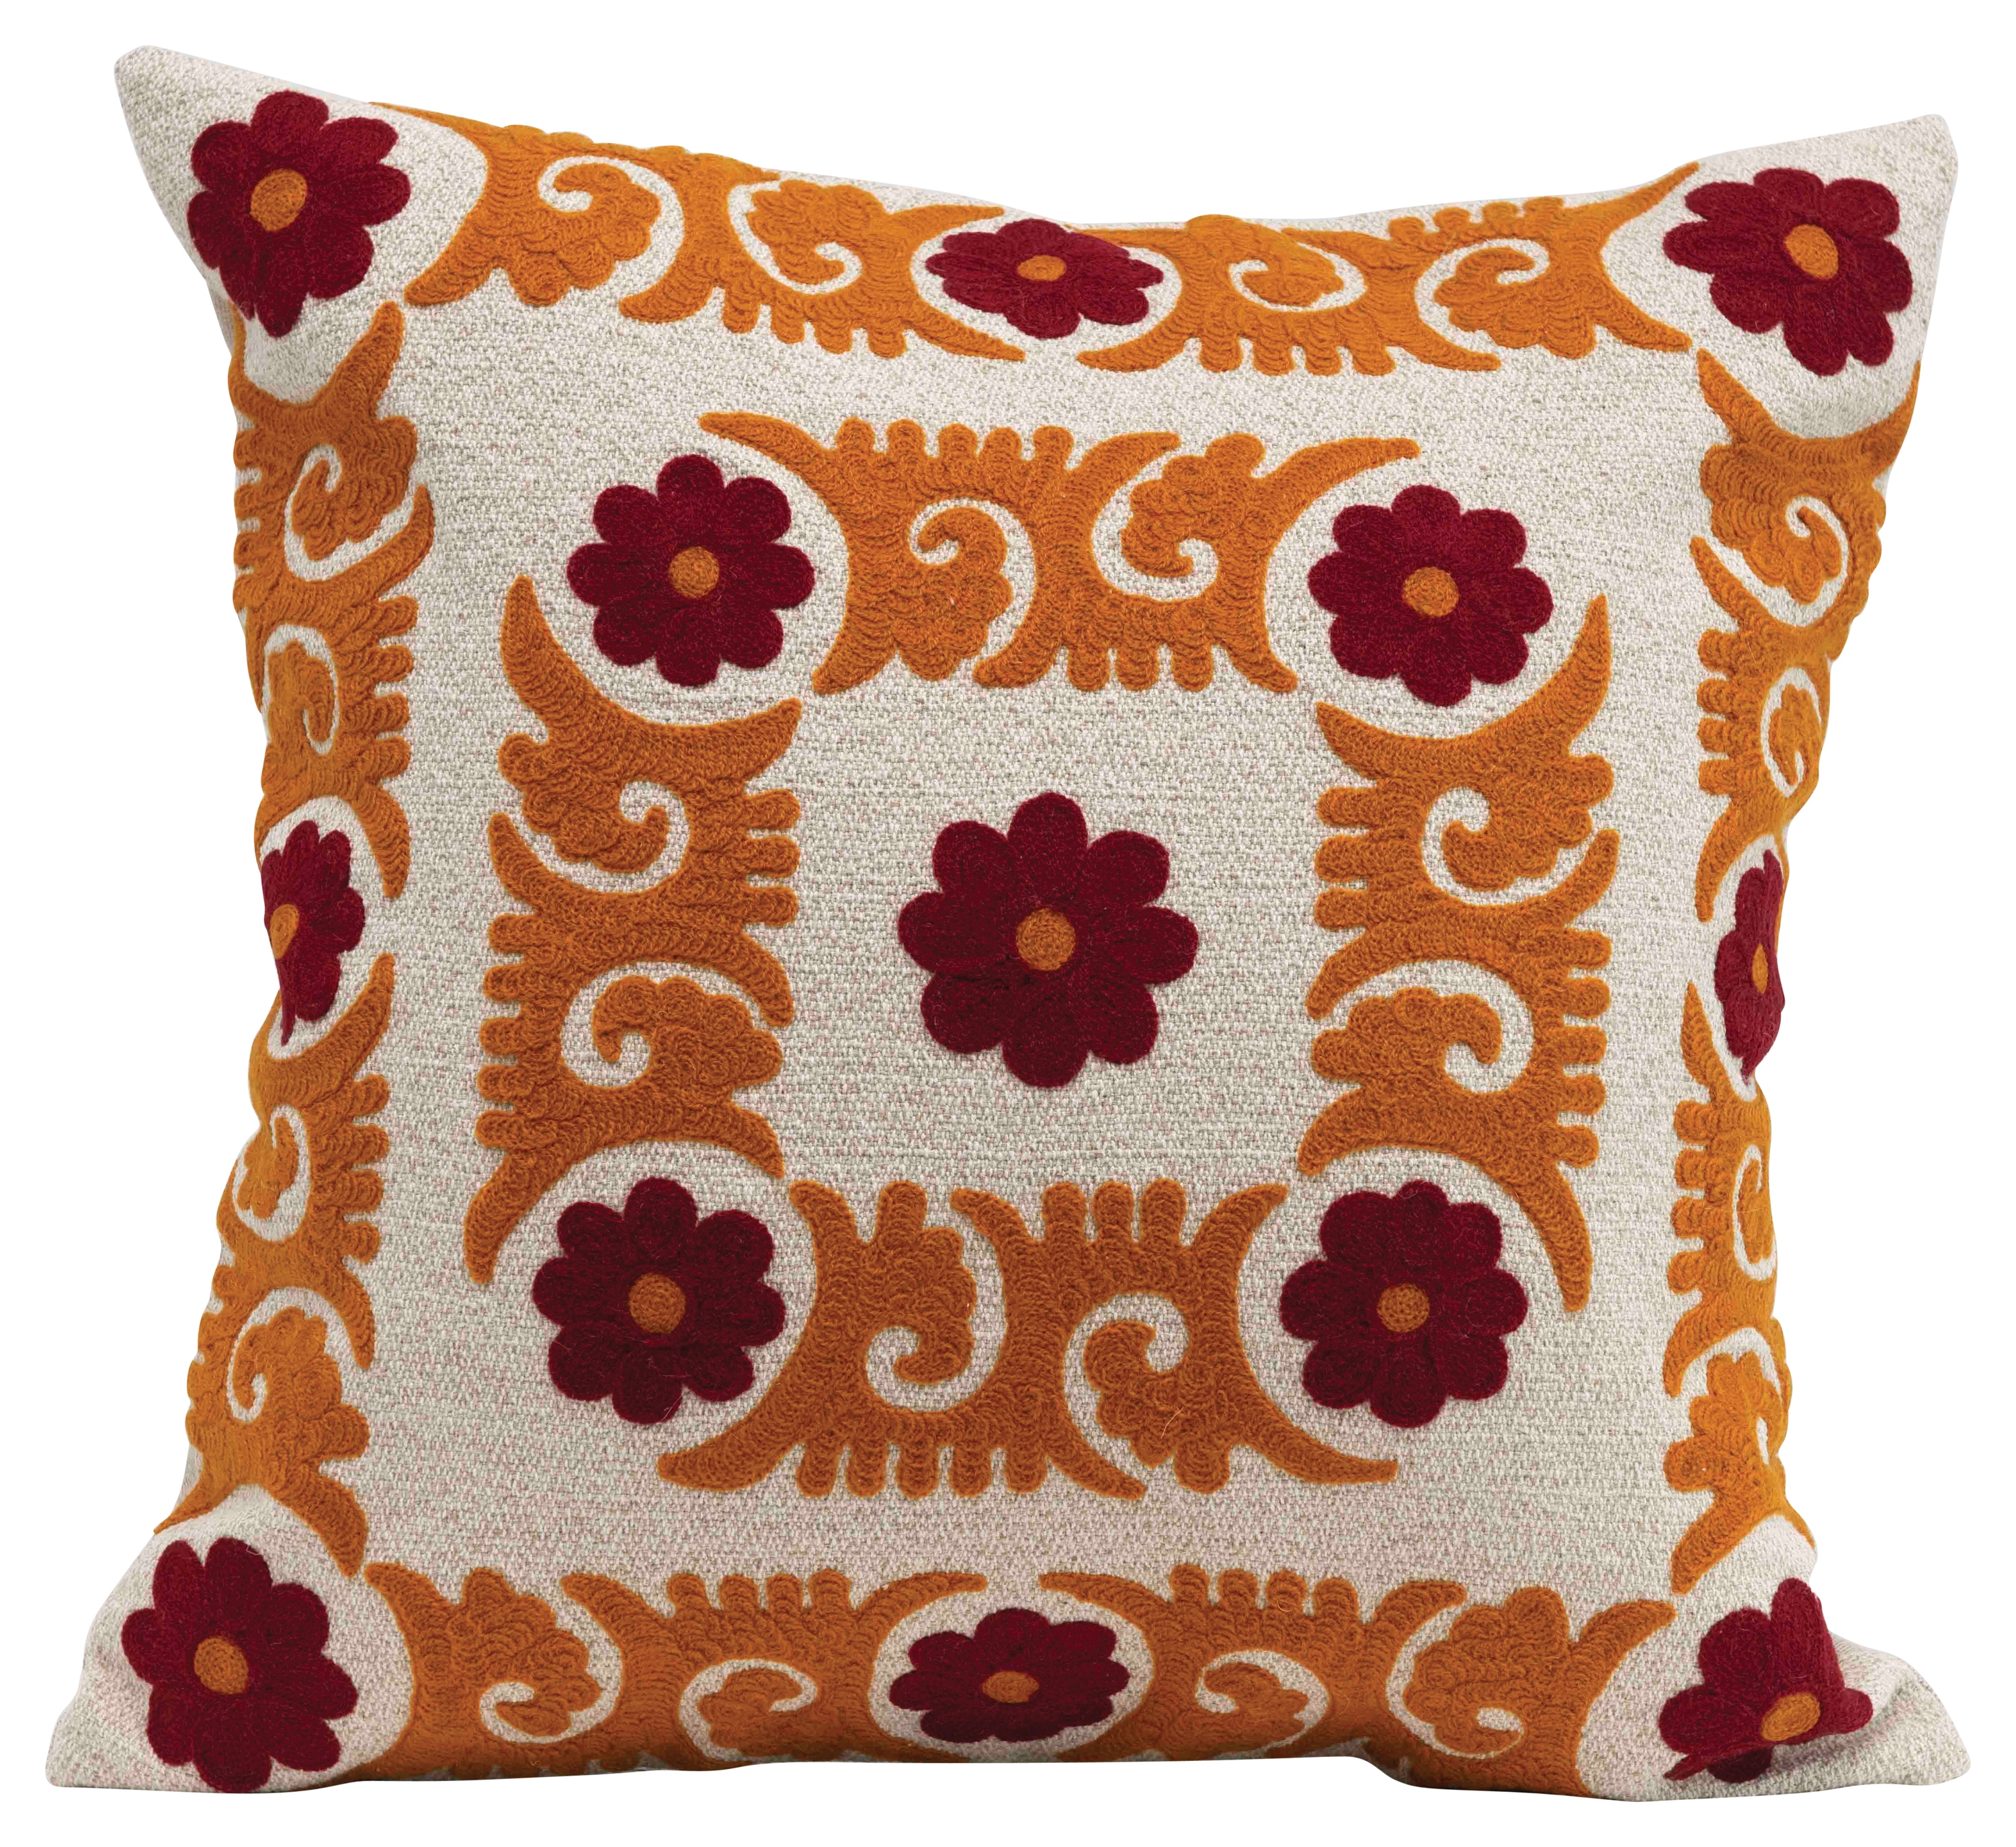 Square Floral Embroidered Cotton Pillow - Image 0